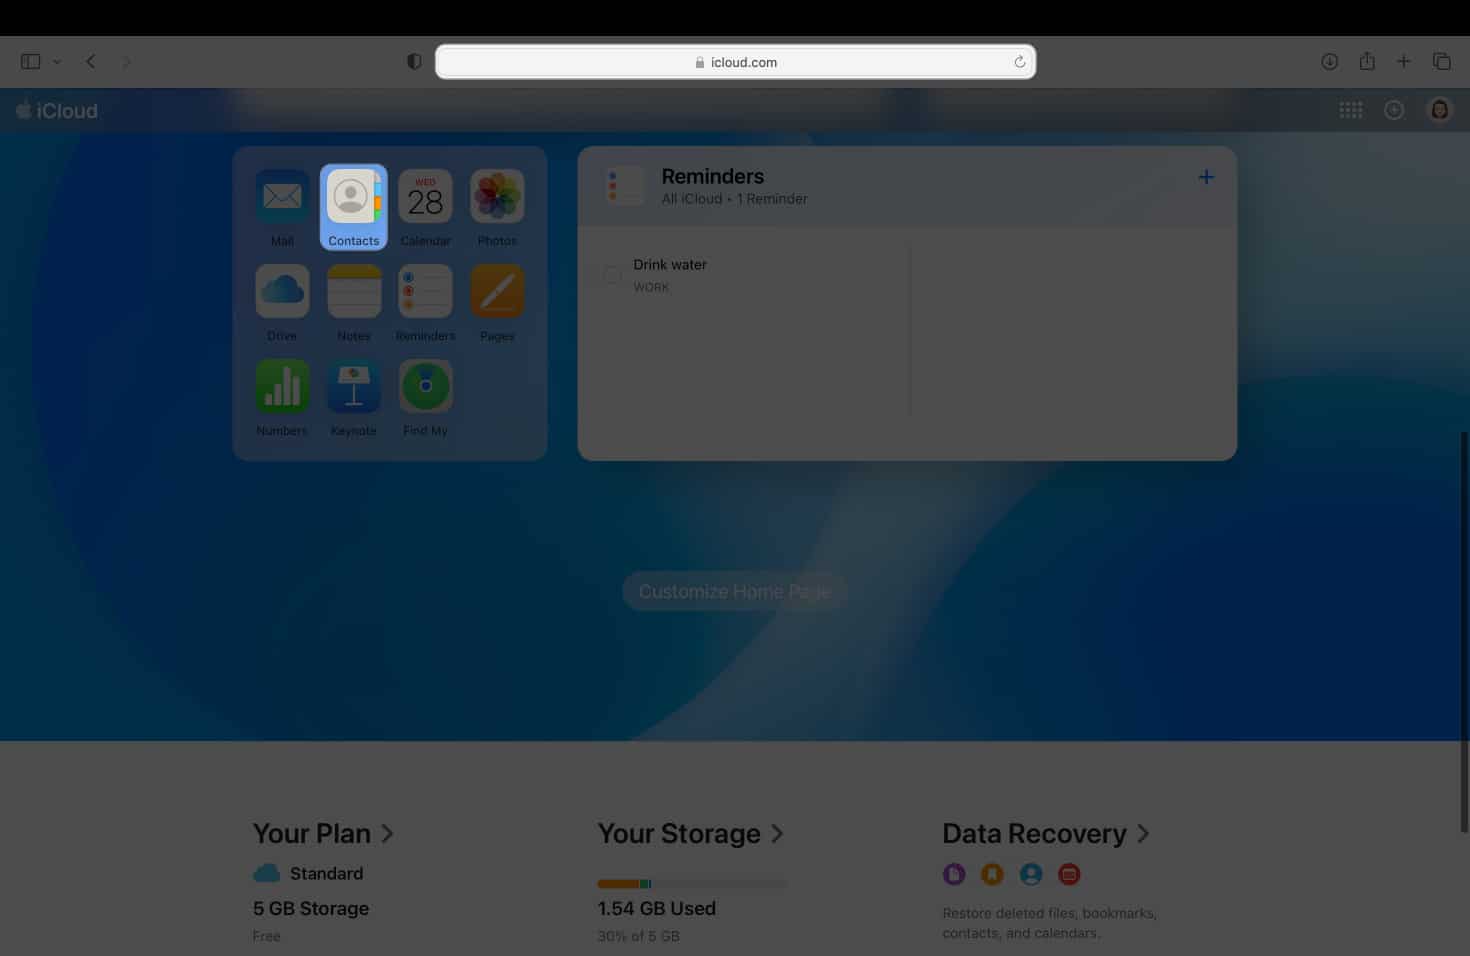 Open contacts tab on iCloud